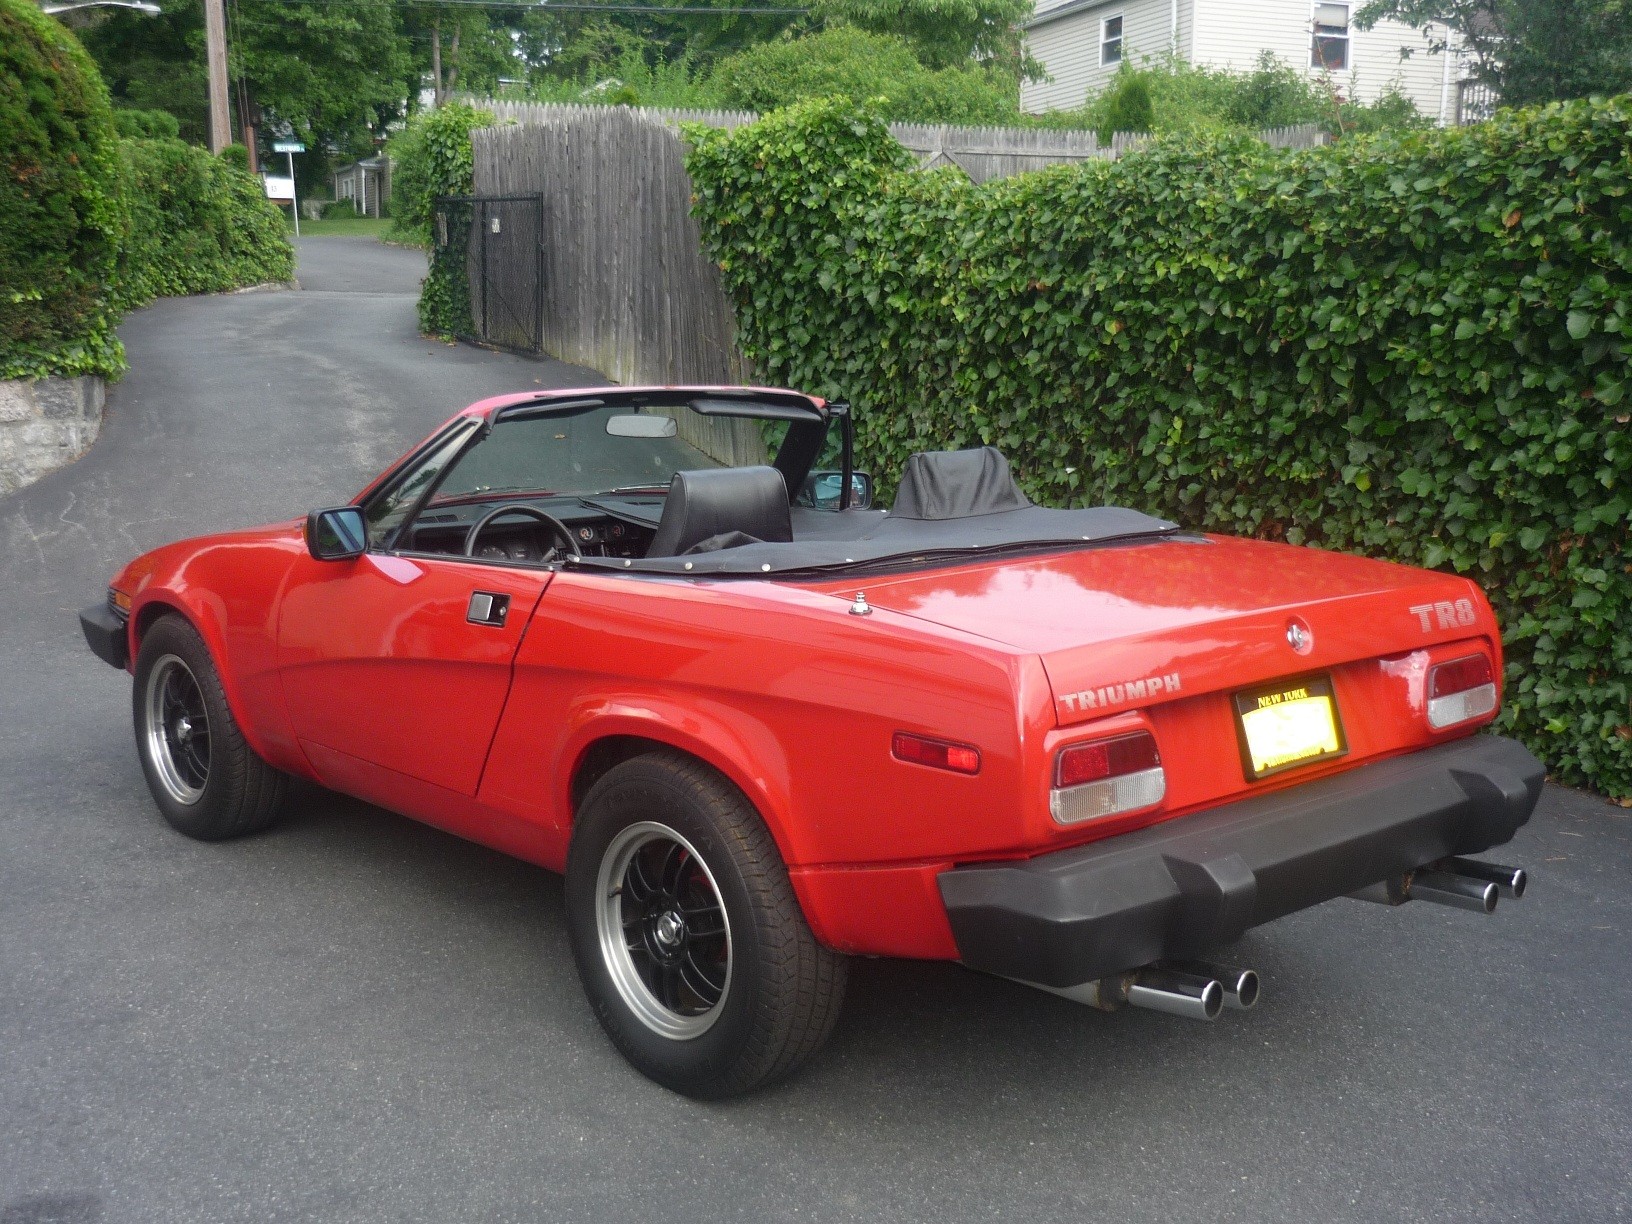 1980 Triumph TR8 Red, for sale in United States, $12,900.